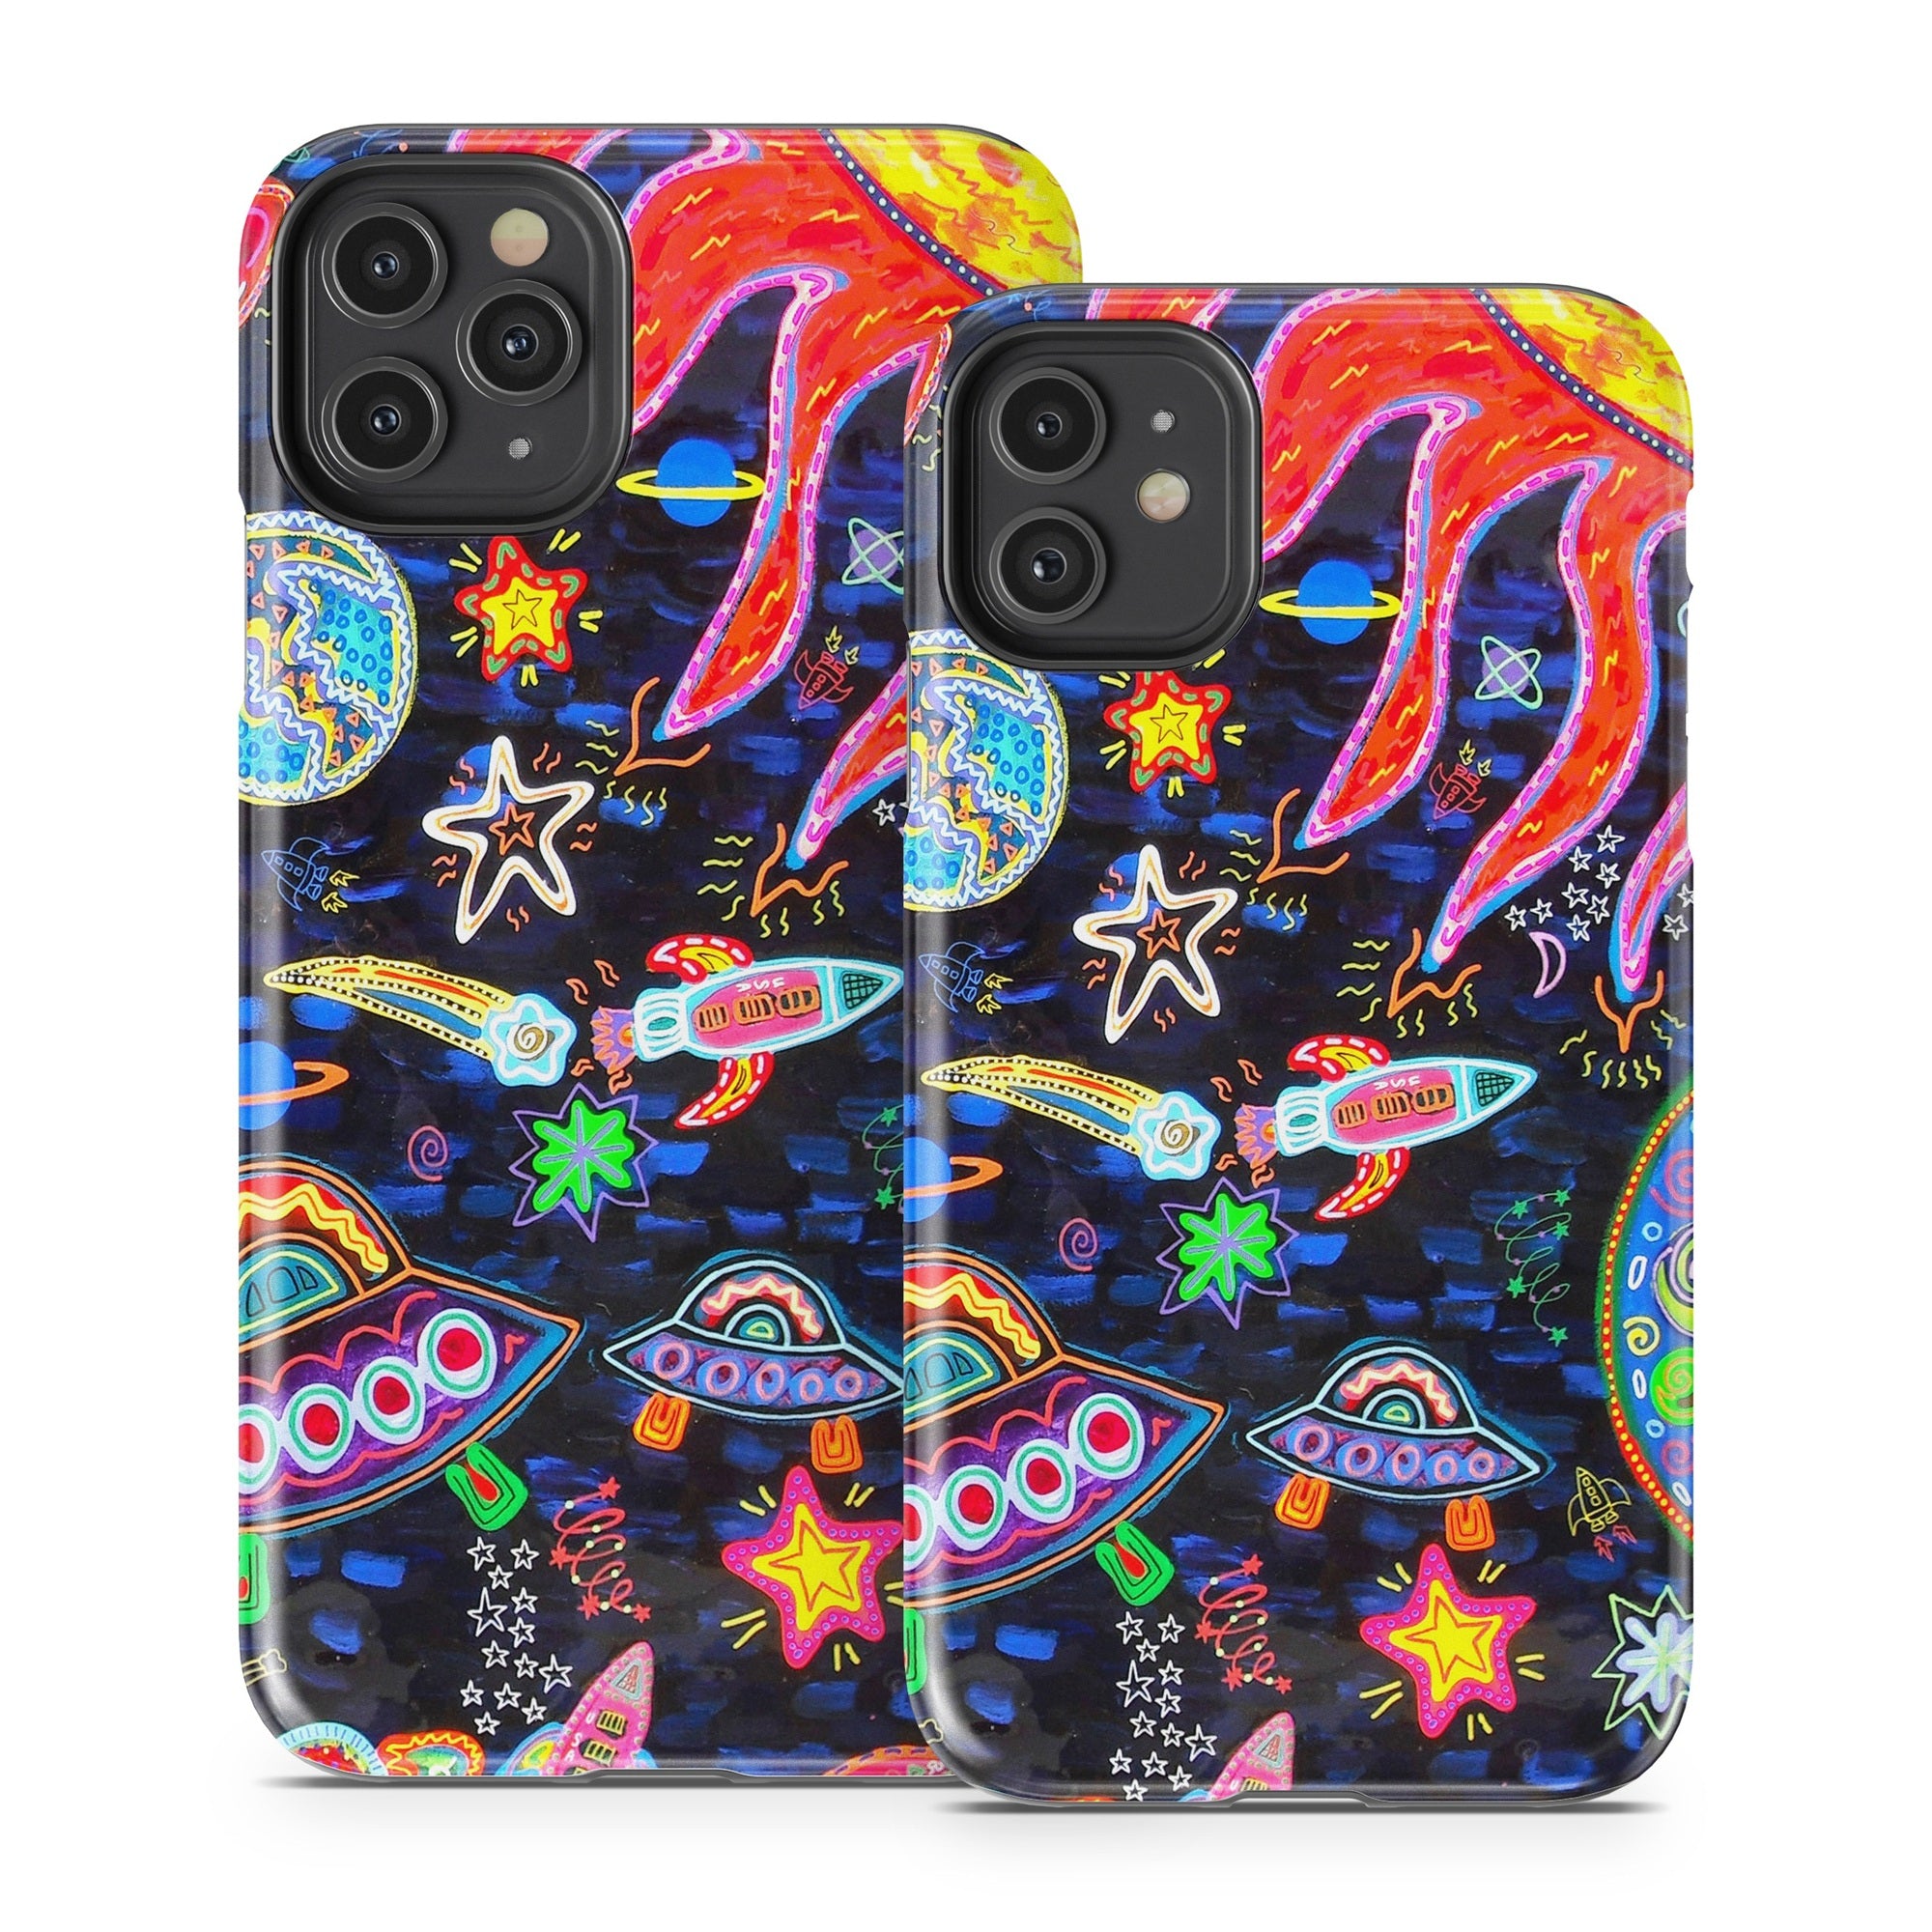 Out to Space - Apple iPhone 11 Tough Case